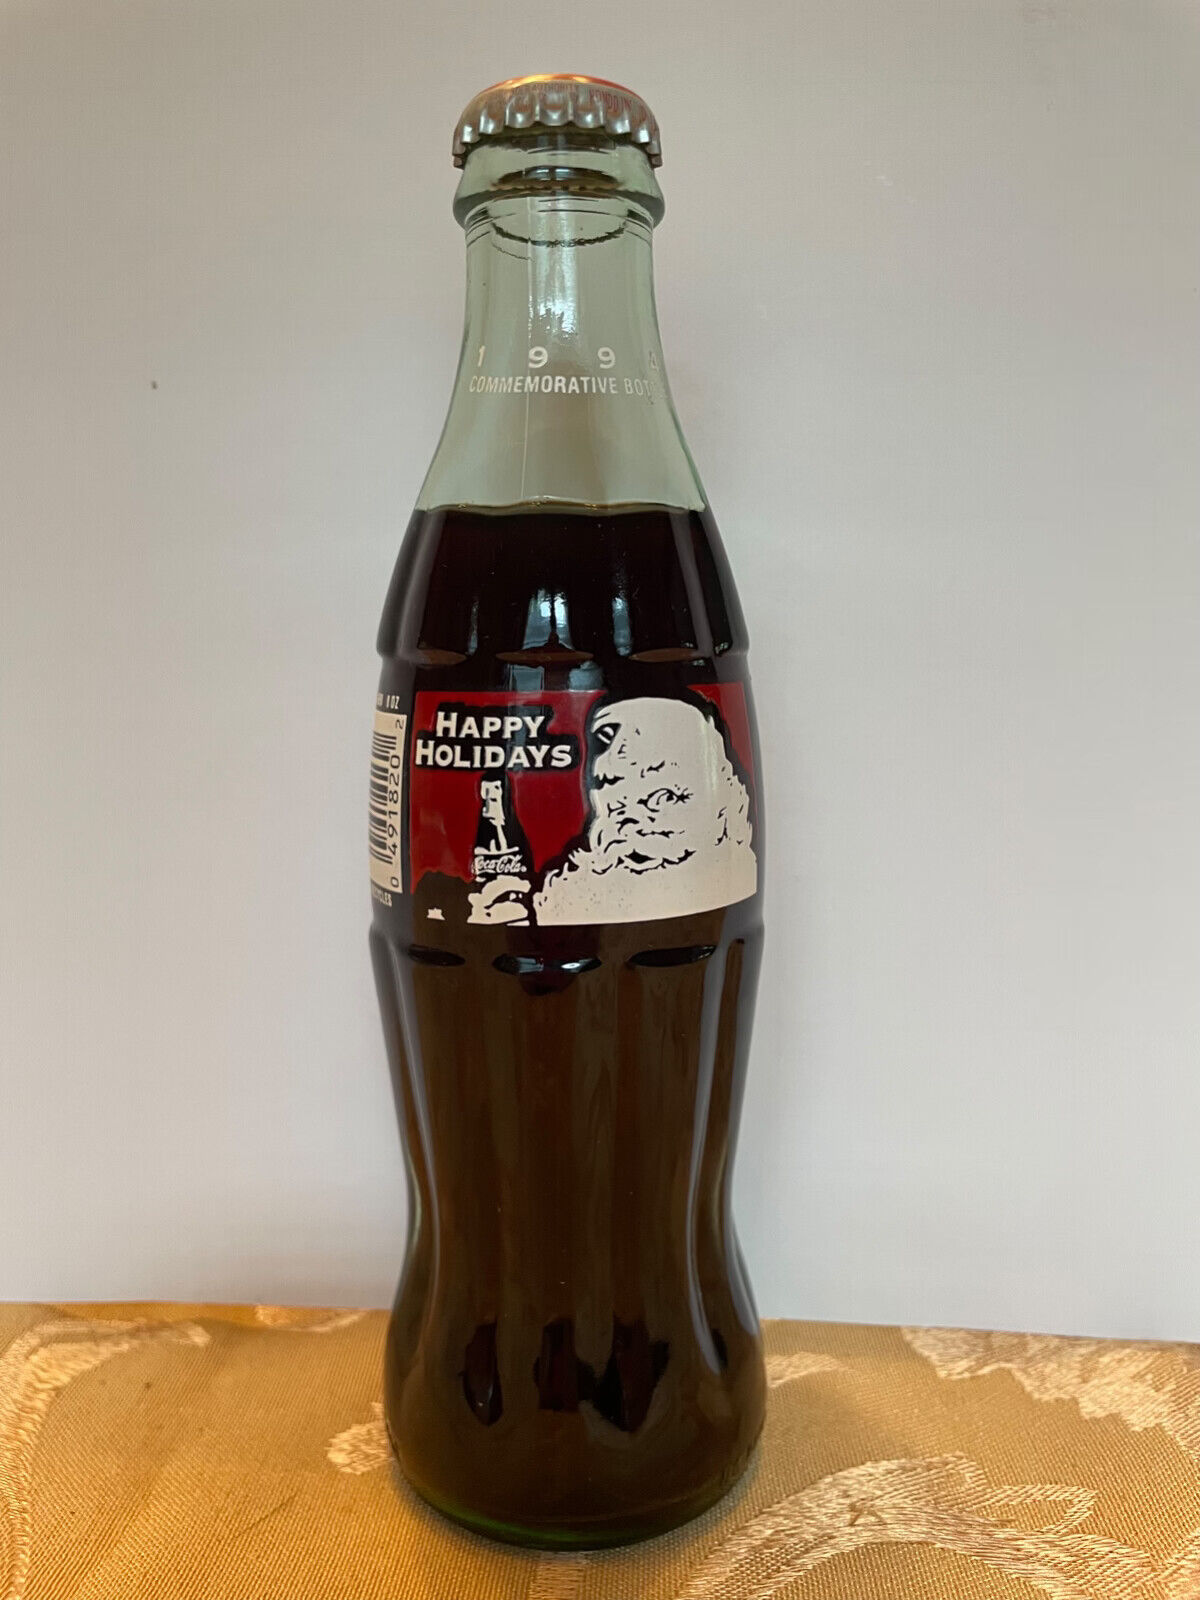 1994 HAPPY HOLIDAYS SANTA CLAUS 8 OUNCE GLASS COCA-COLA BOTTLE FULL